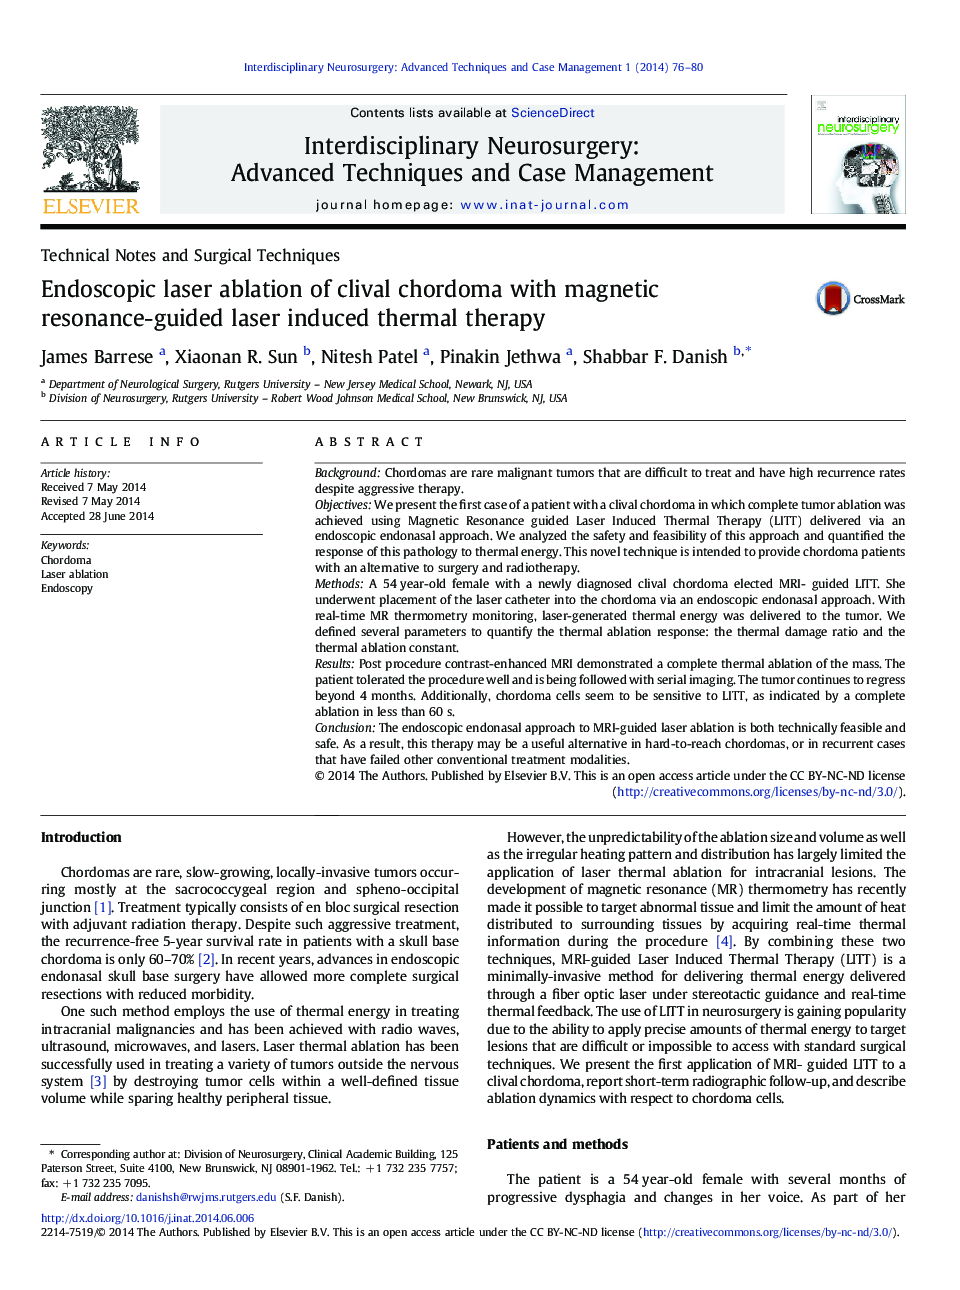 Endoscopic laser ablation of clival chordoma with magnetic resonance-guided laser induced thermal therapy